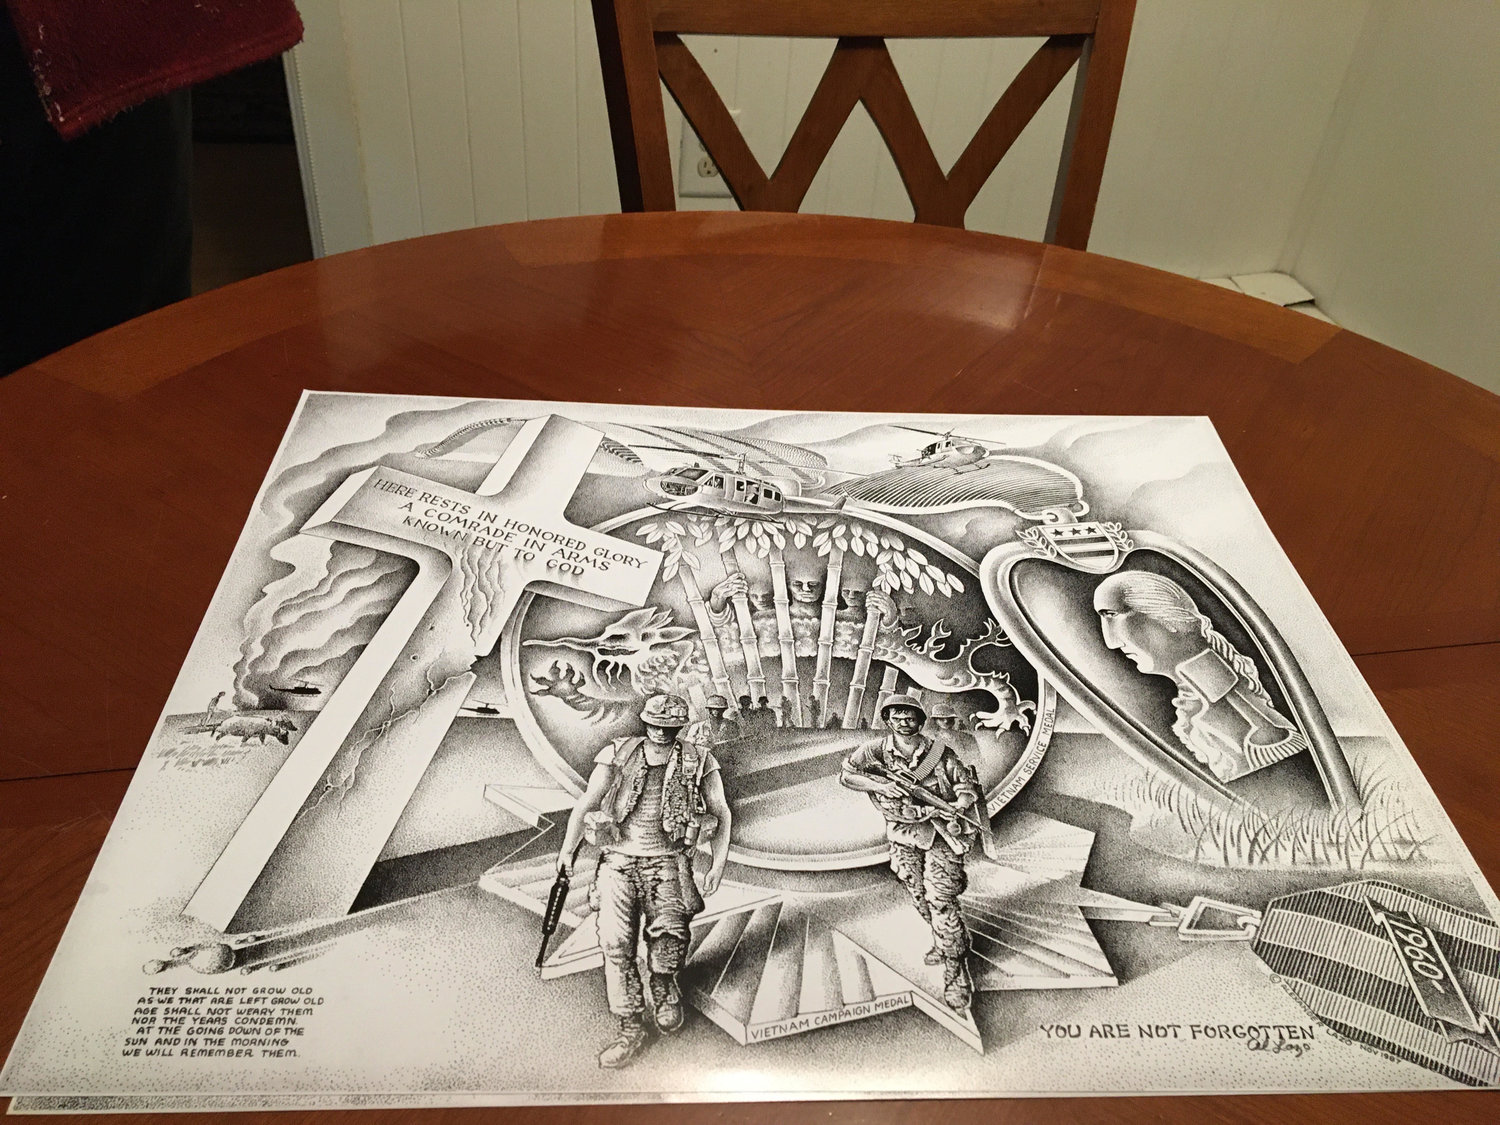 Edward Amodeo is selling prints of original stipple artwork featuring references to the war in Vietnam.